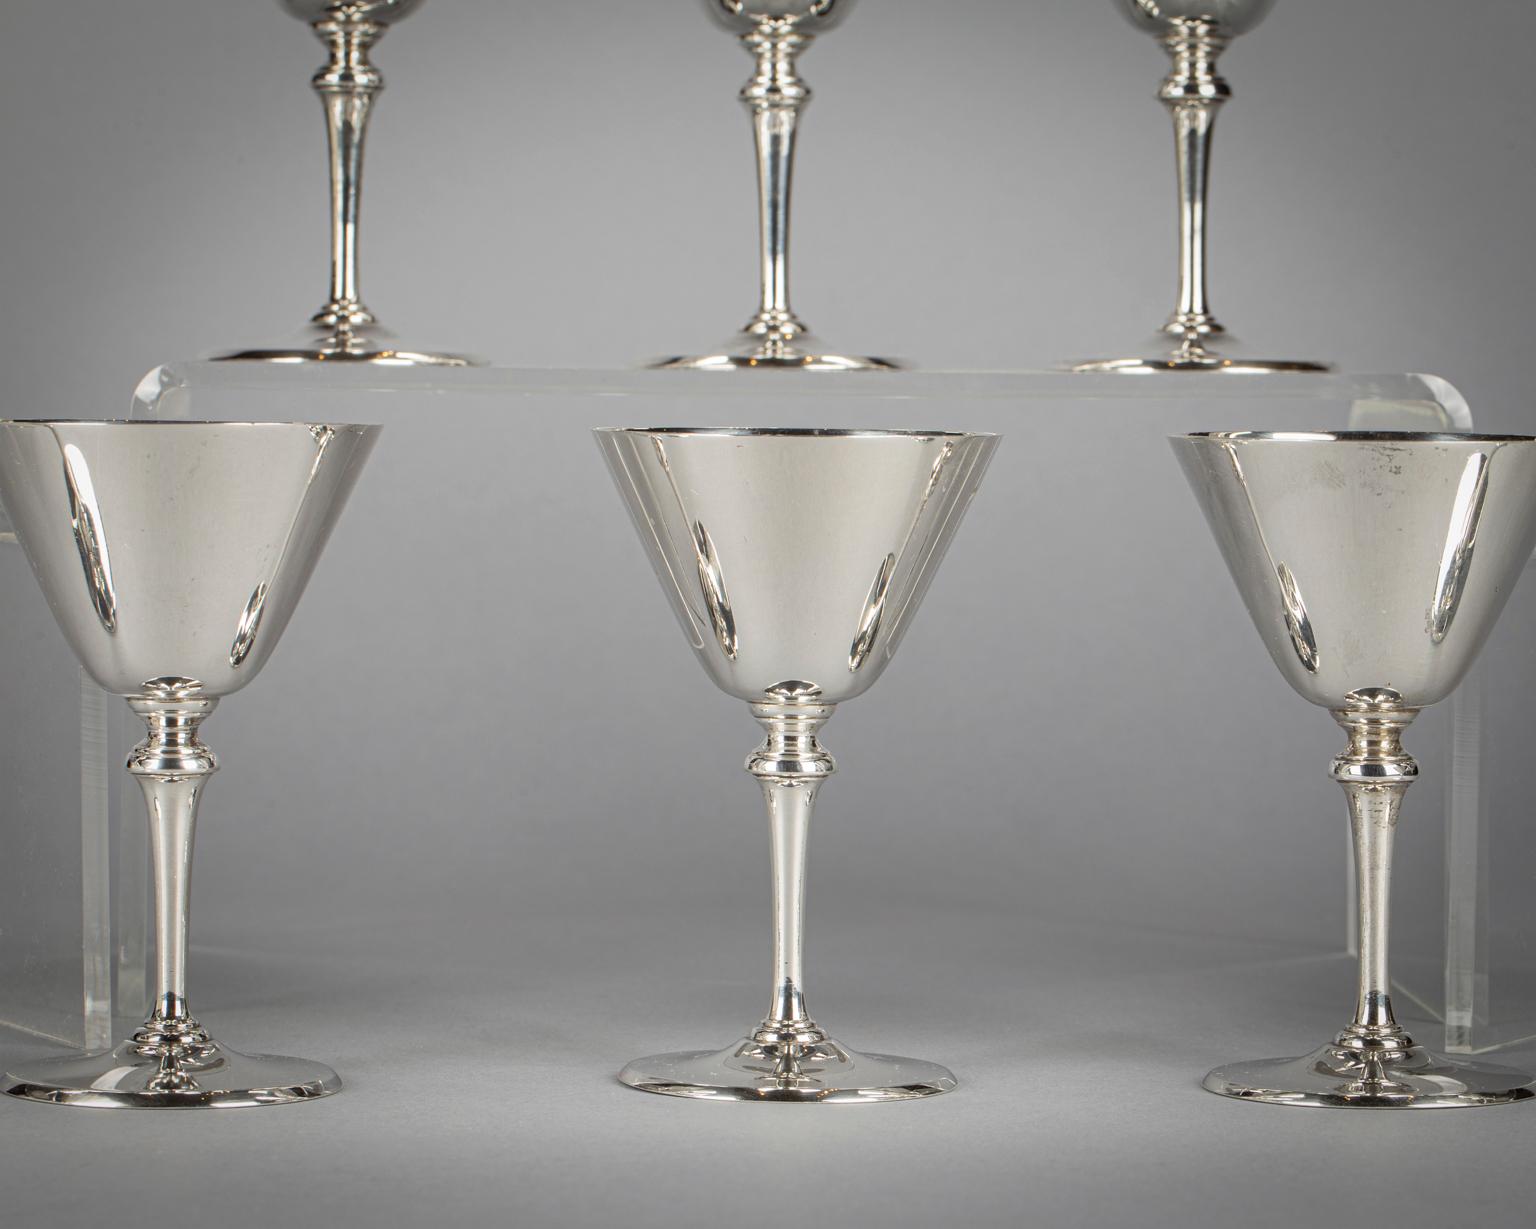 Cone-shaped cup with baluster stem on sloping spreading foot. Marked Tiffany and Co. 